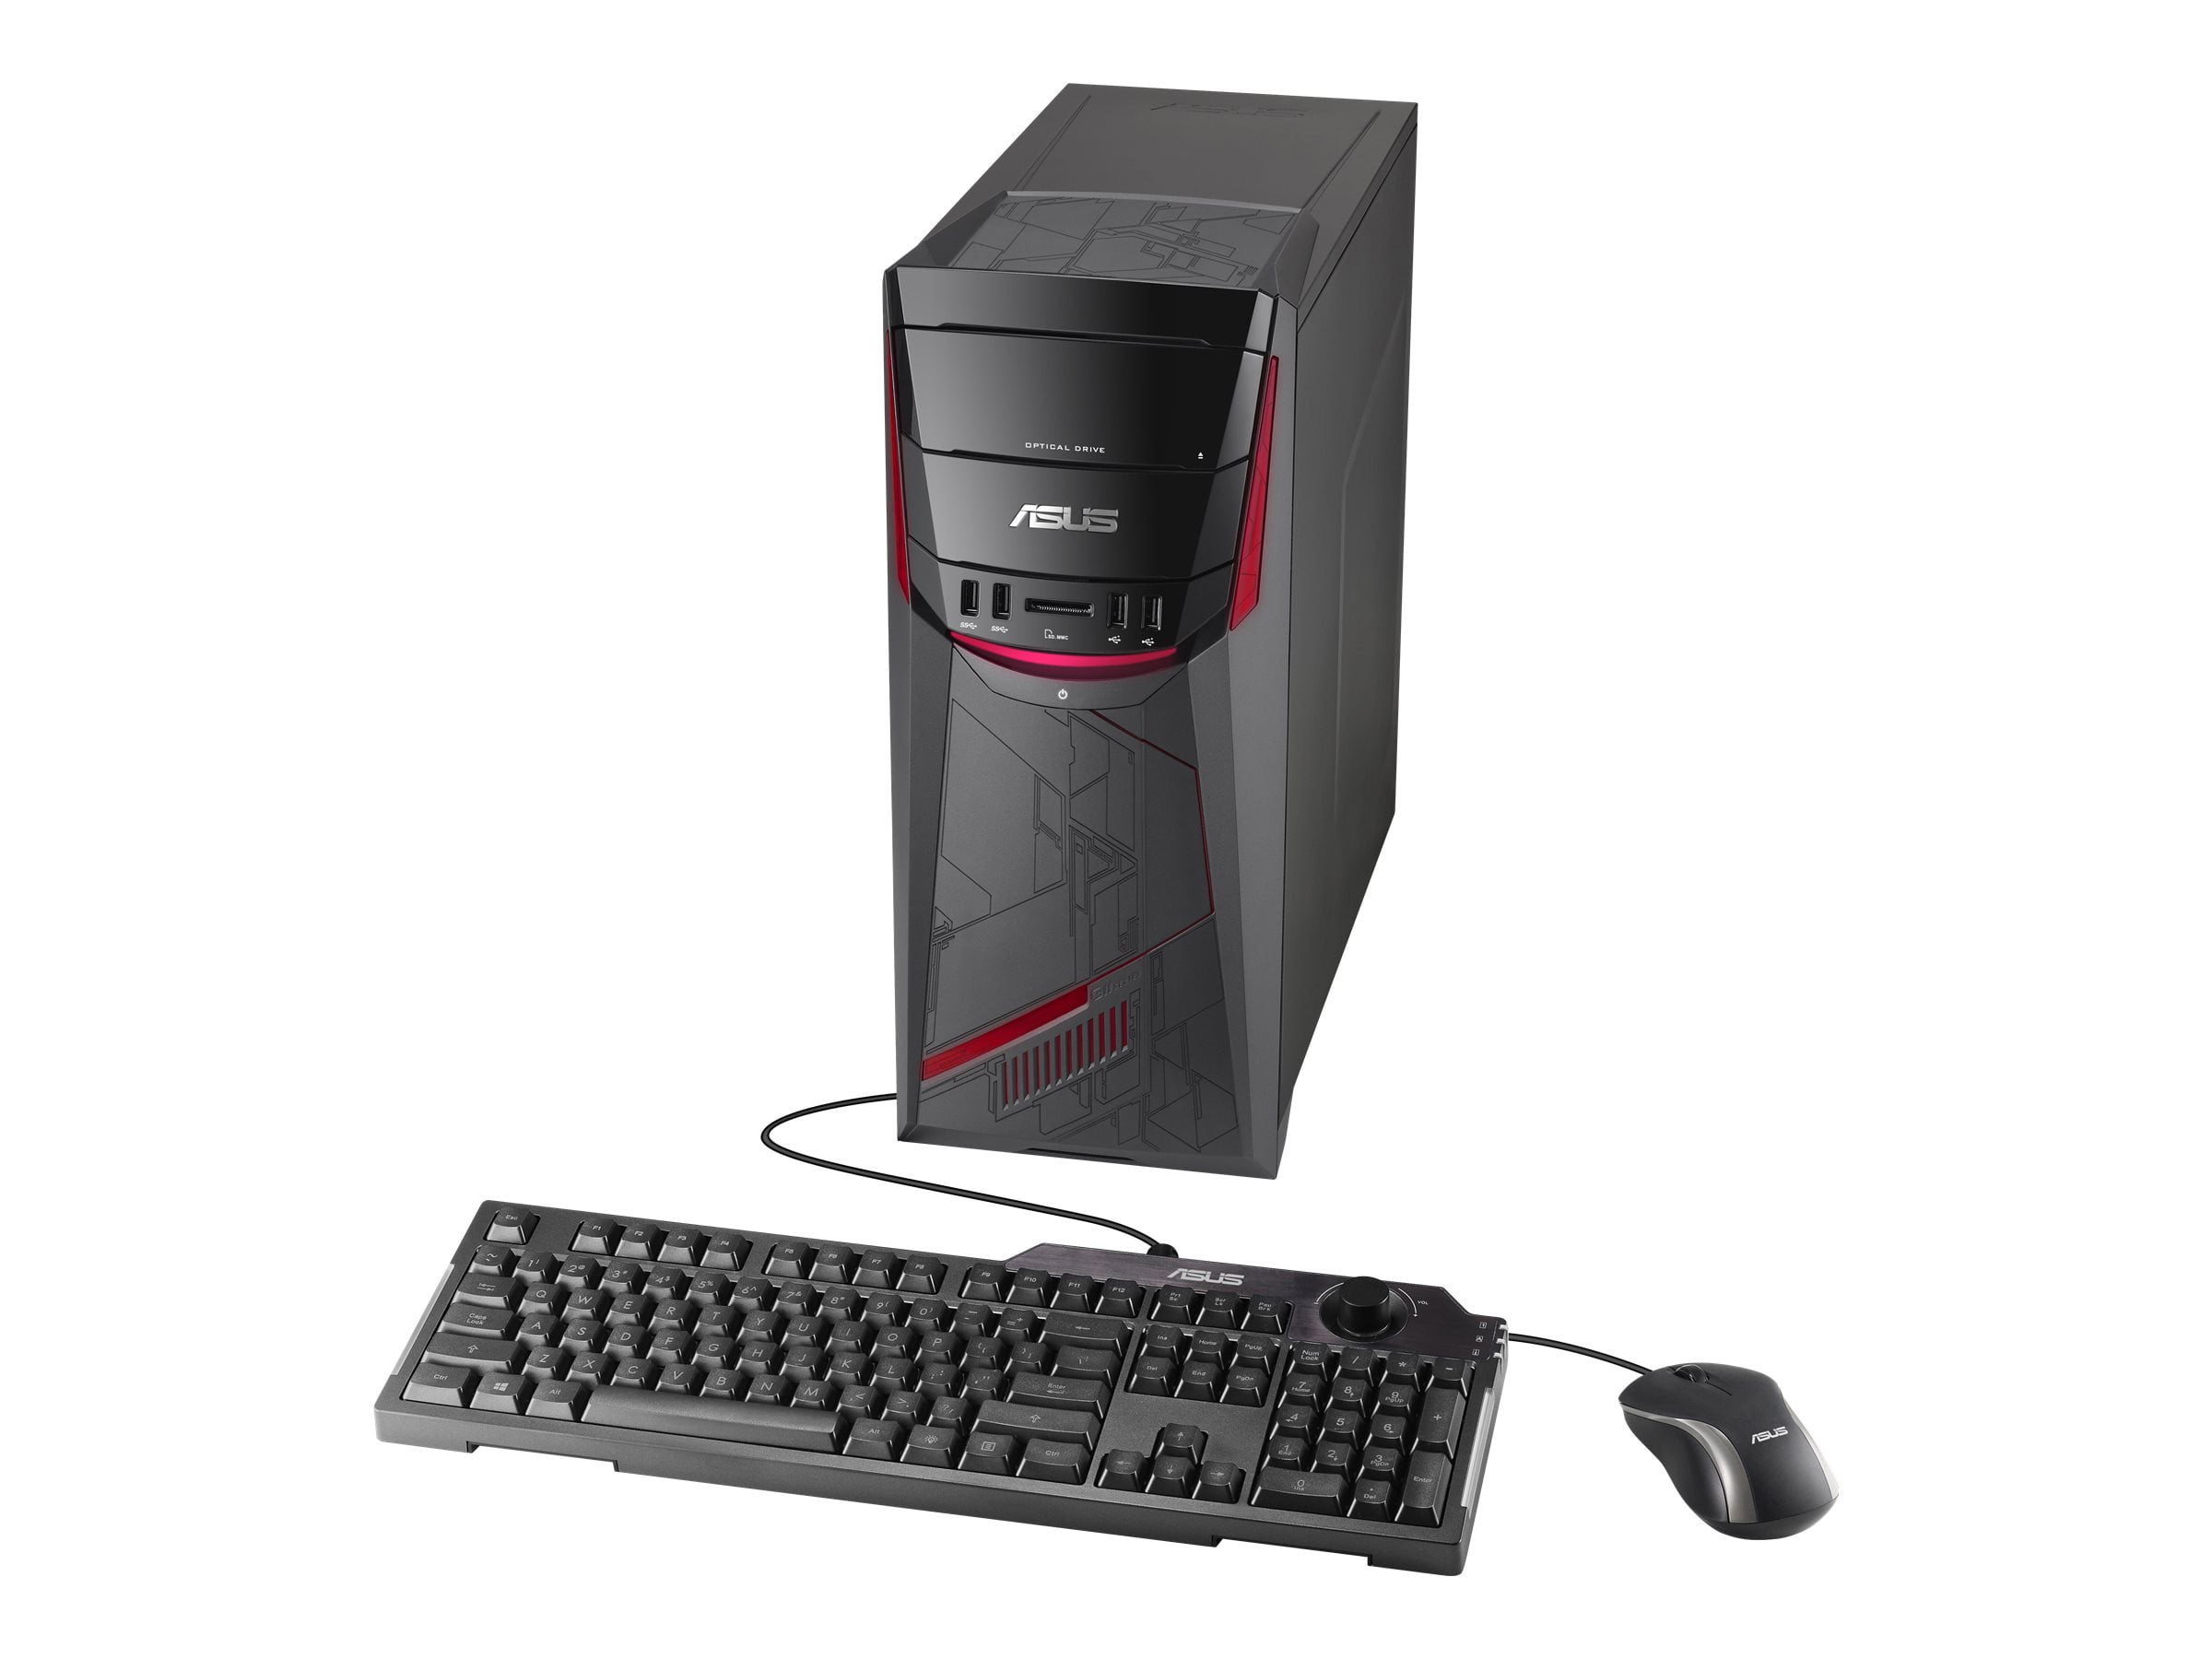 ASUS G11CD-WS51 - Tower - Core i5 6400 / 2.7 GHz - RAM 8 GB - HDD 